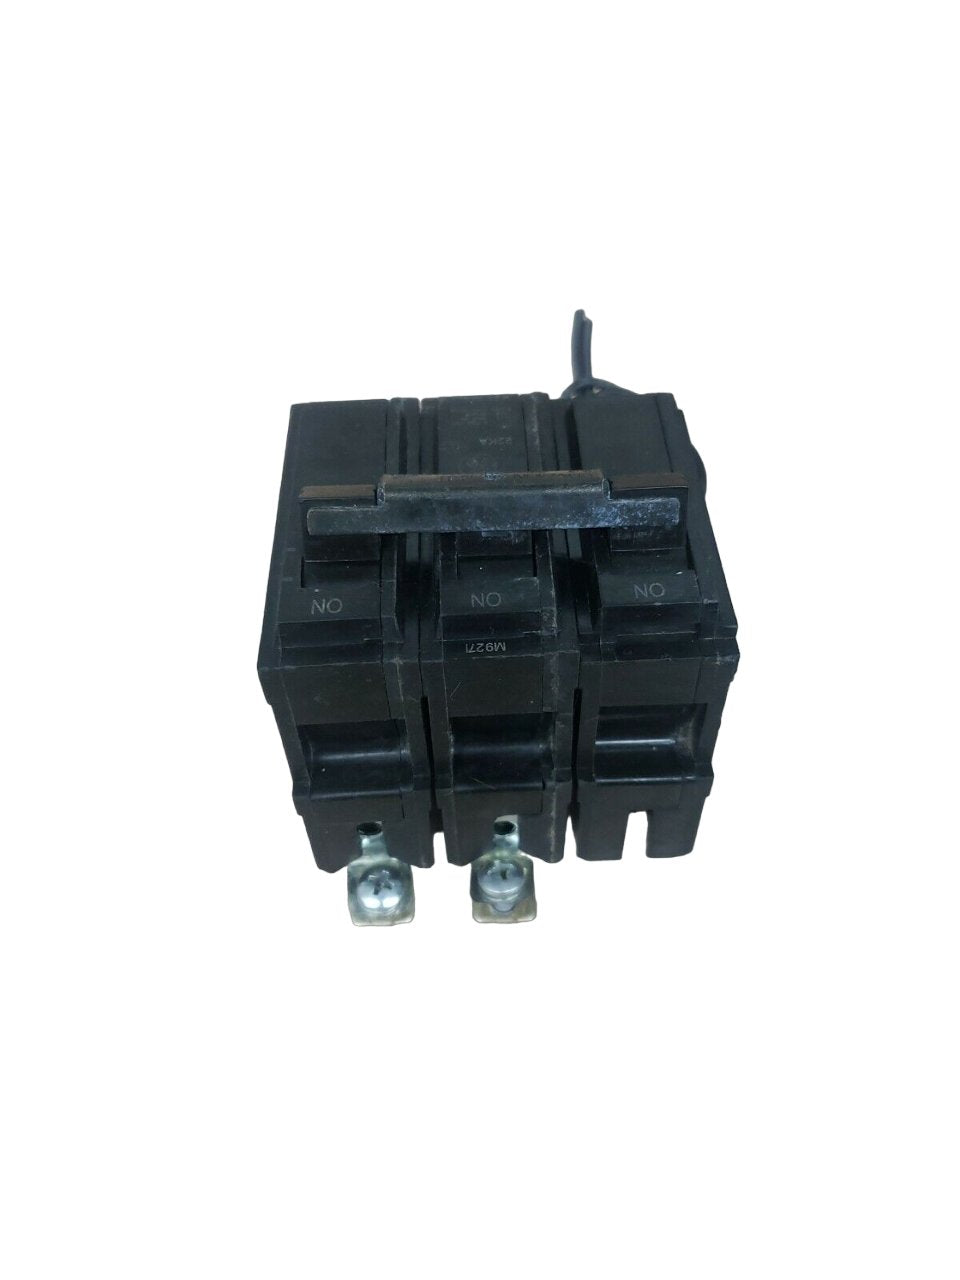 THHQB2160ST1 - General Electrics - Molded Case Circuit Breakers